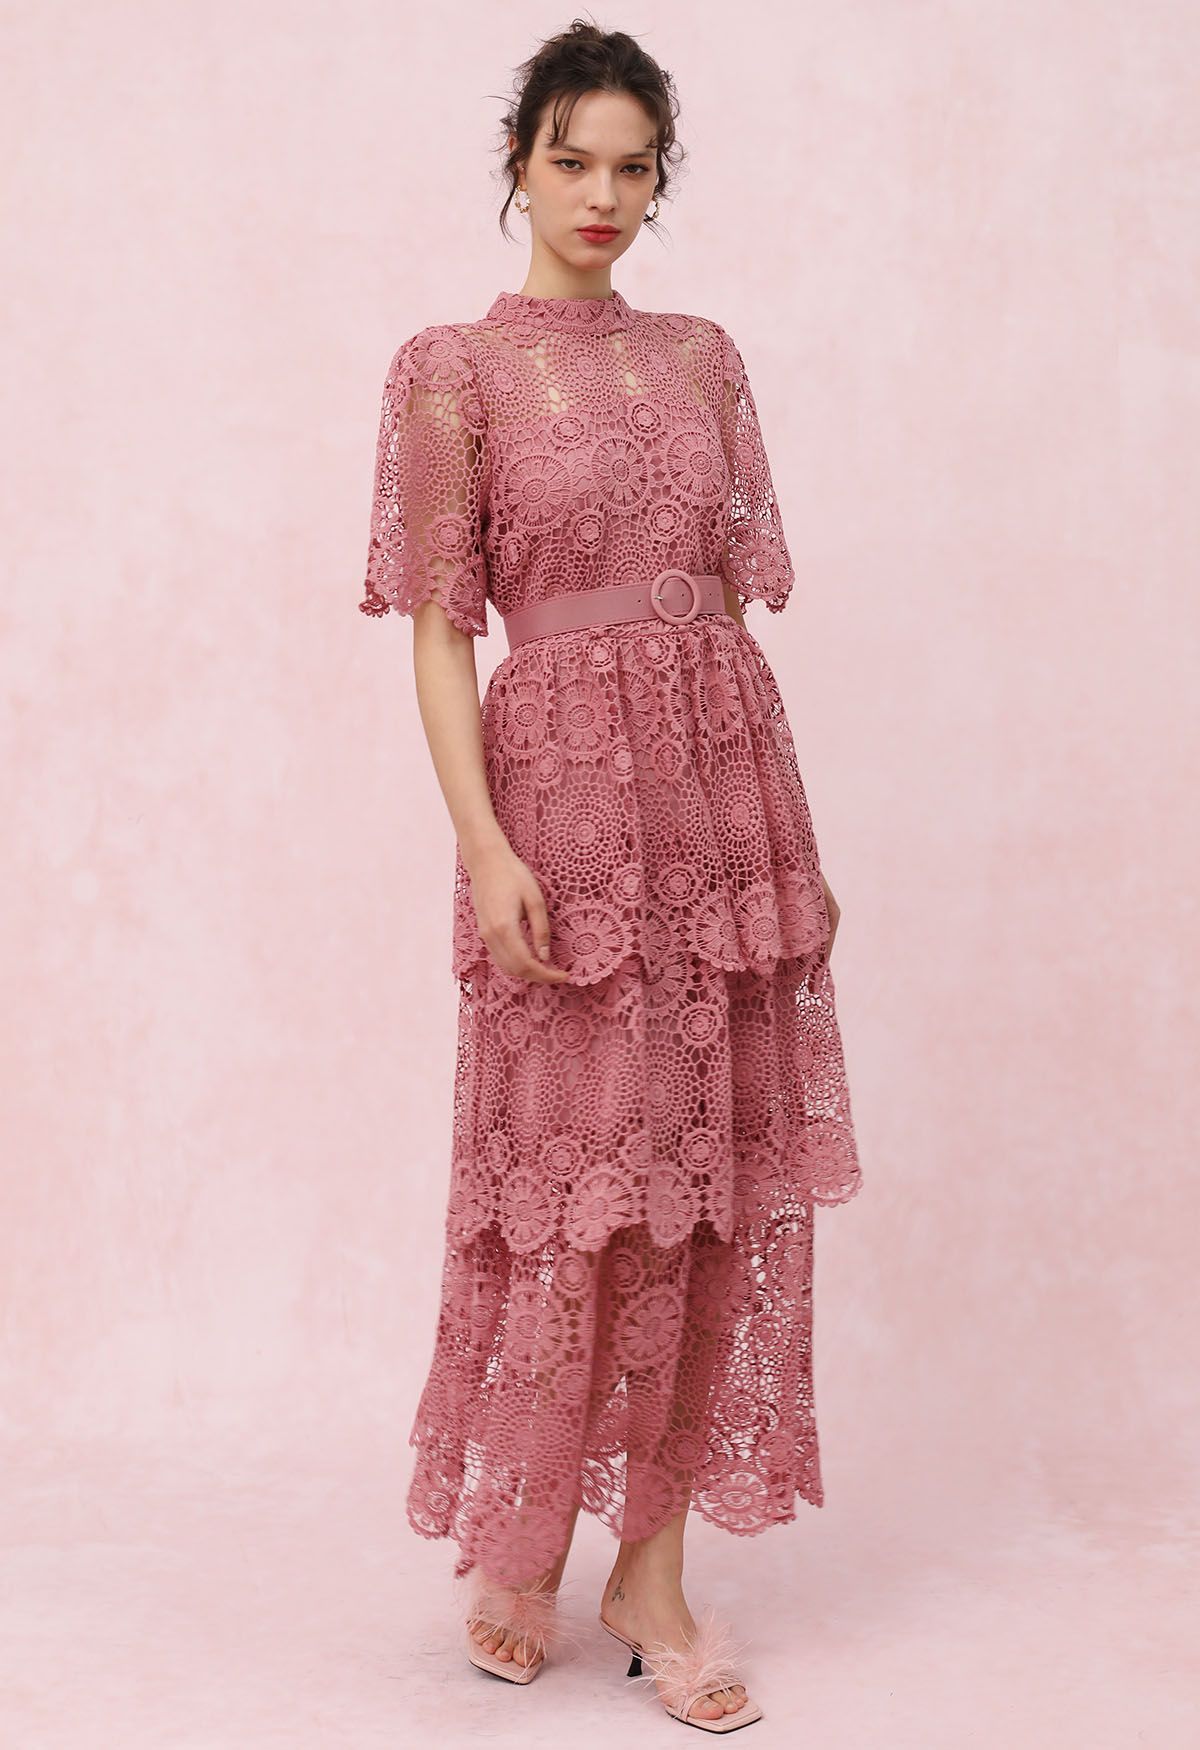 Cutwork Lace Belted Tiered Maxi Dress in Pink